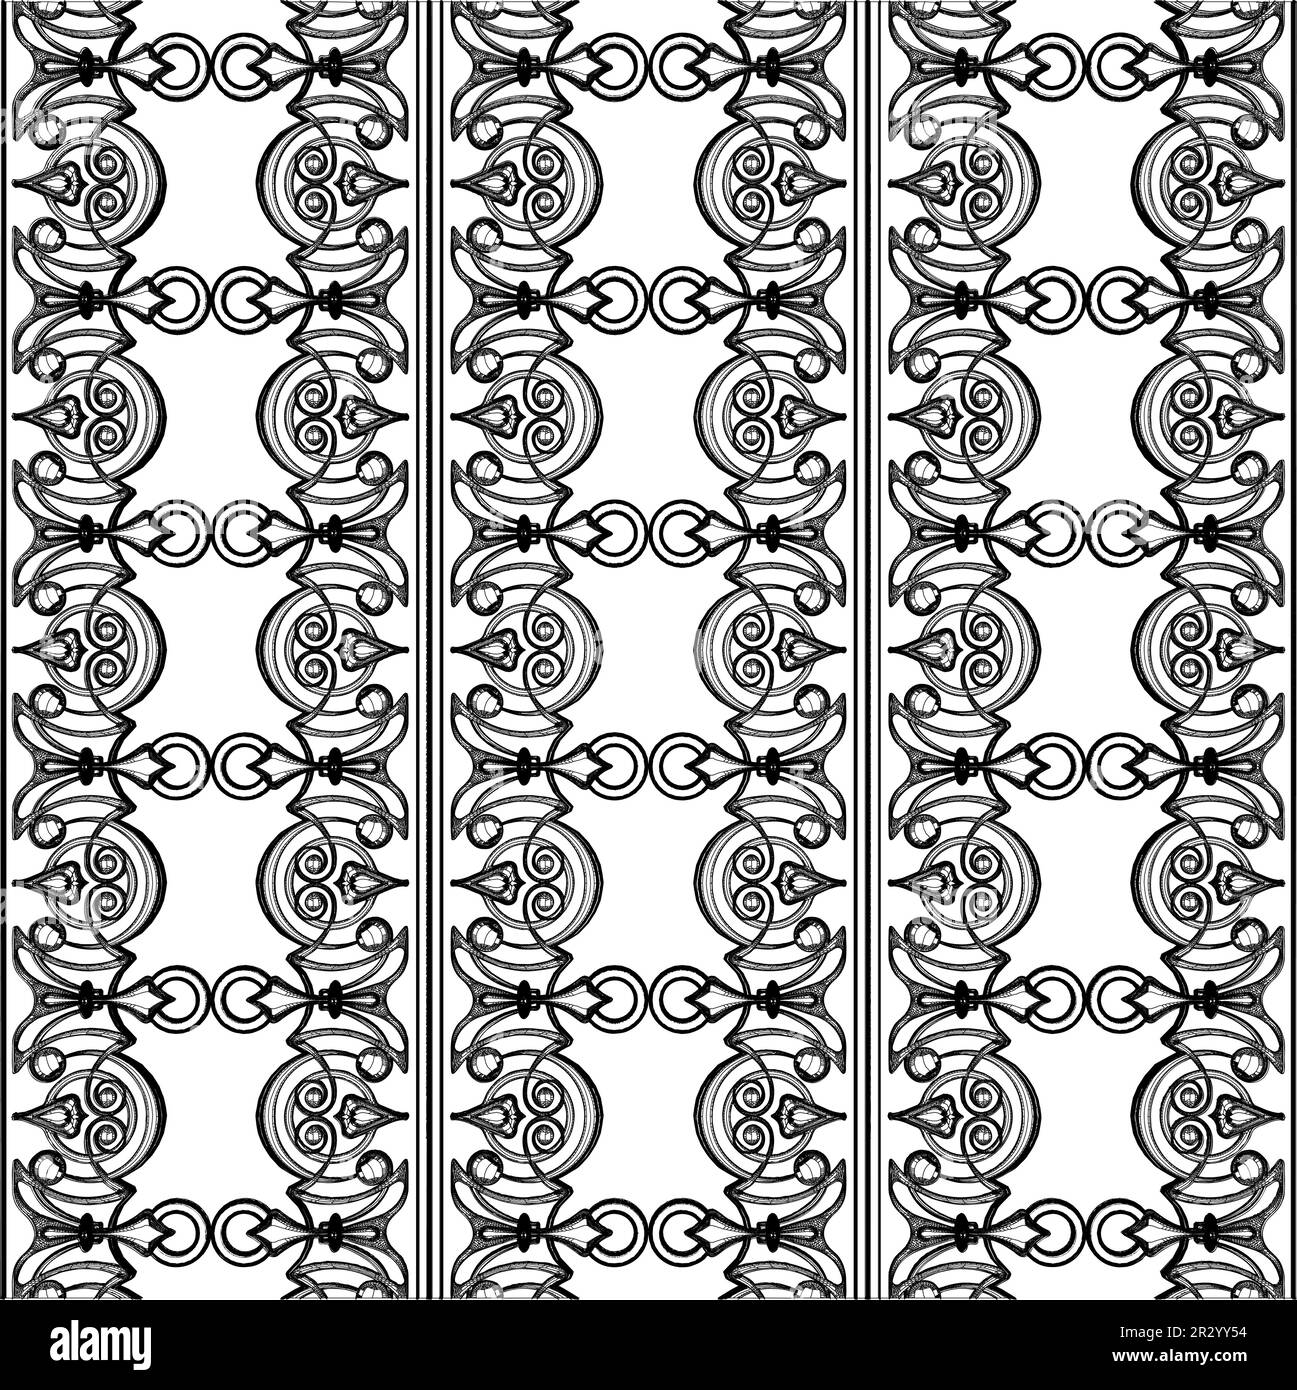 Antique Wall Panel Frame Vector. Illustration Isolated On White Background. Art Deco Art Nouveau Wall Panel Texture Pattern. Stock Vector